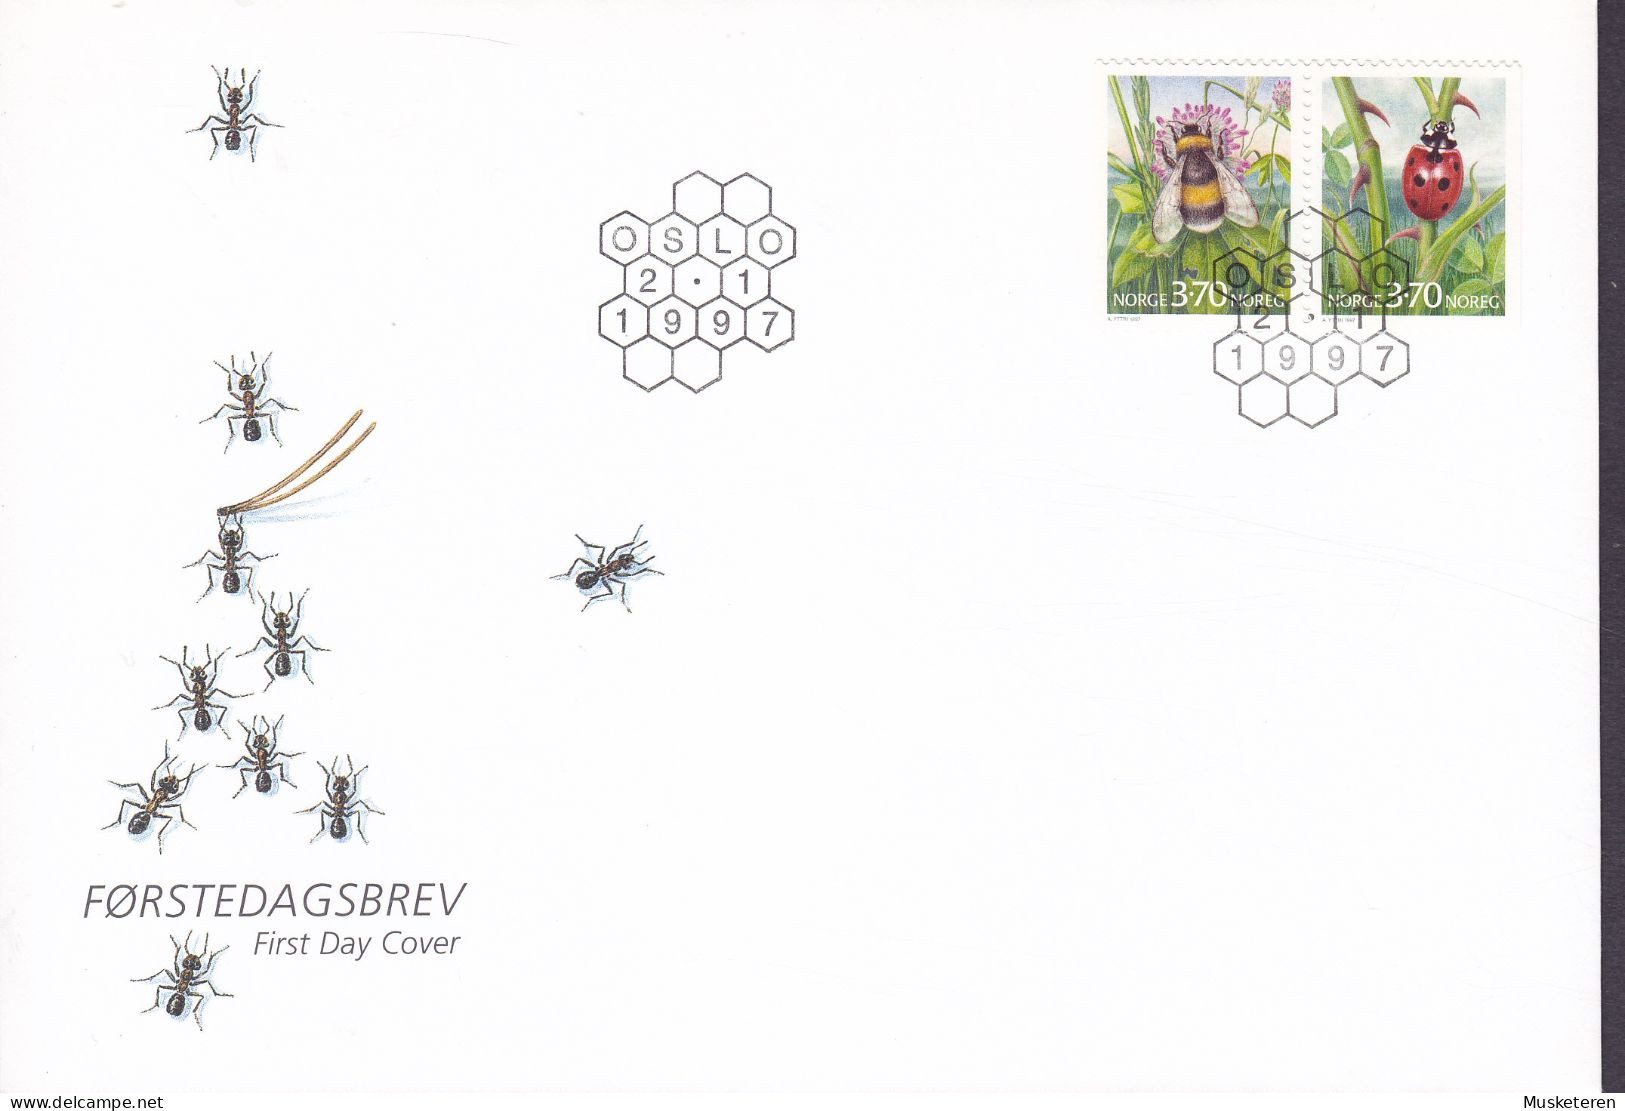 Norway 1997 FDC Cover Ersttags Brief Insekten Insects Hummel Bumble Bee & Marienkäfer Ladybird Complete Set !! - FDC